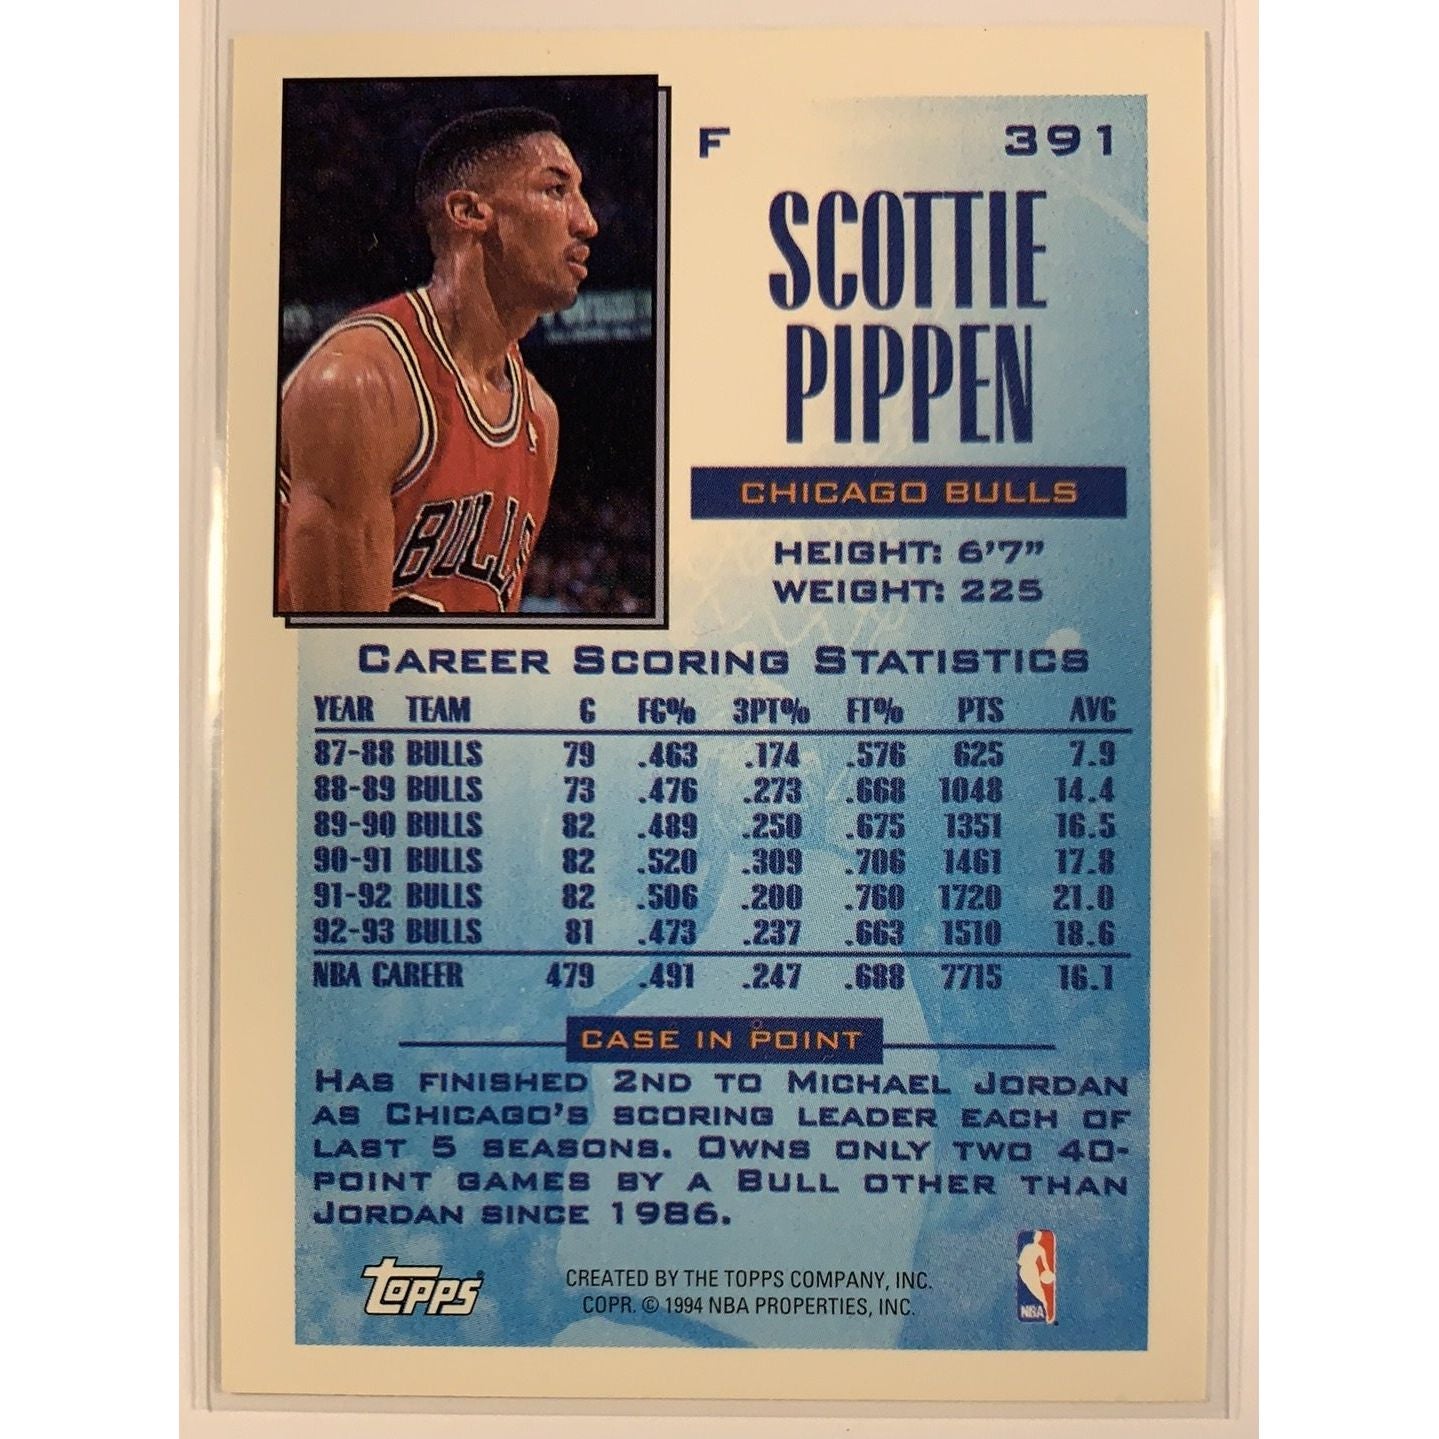  1993-94 Topps Scottie Pippen Future Scoring Leader  Local Legends Cards & Collectibles